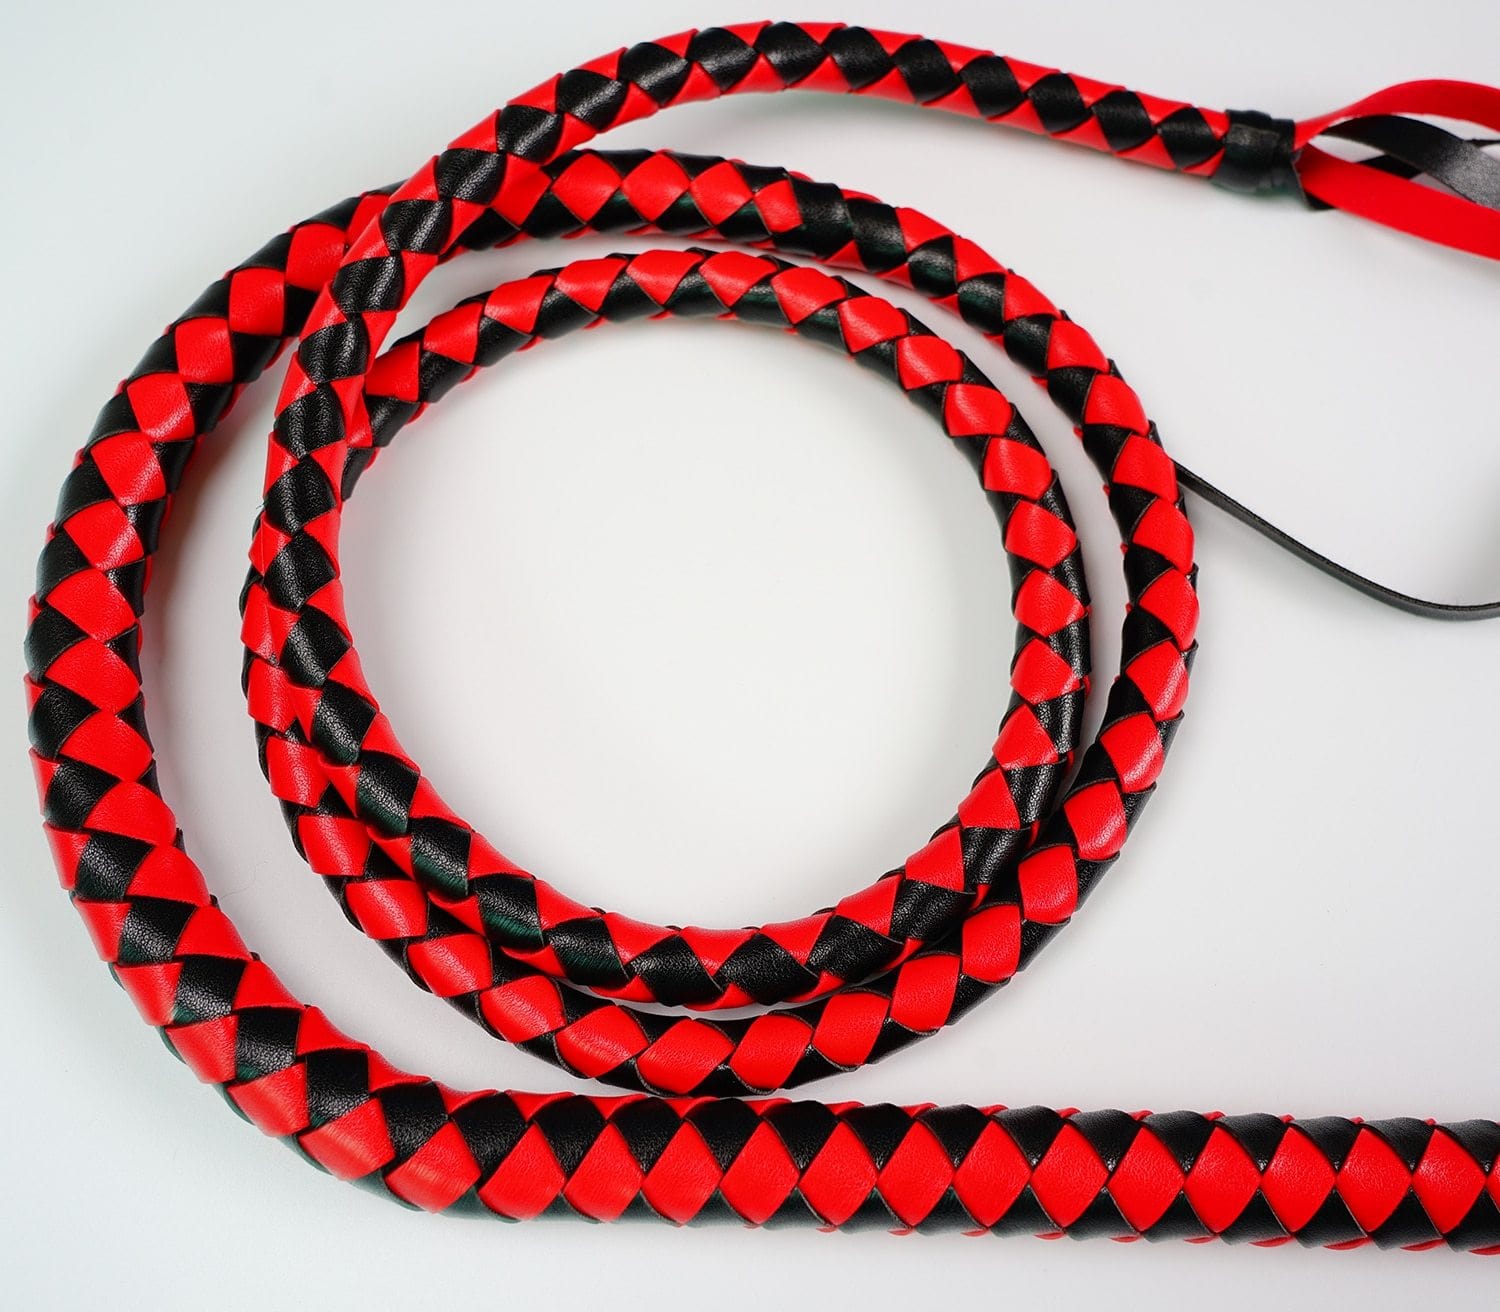 Here is an image of a meticulously crafted Genuine Cow Leather BDSM Whip, offering a blend of beauty and pain for thrilling play.